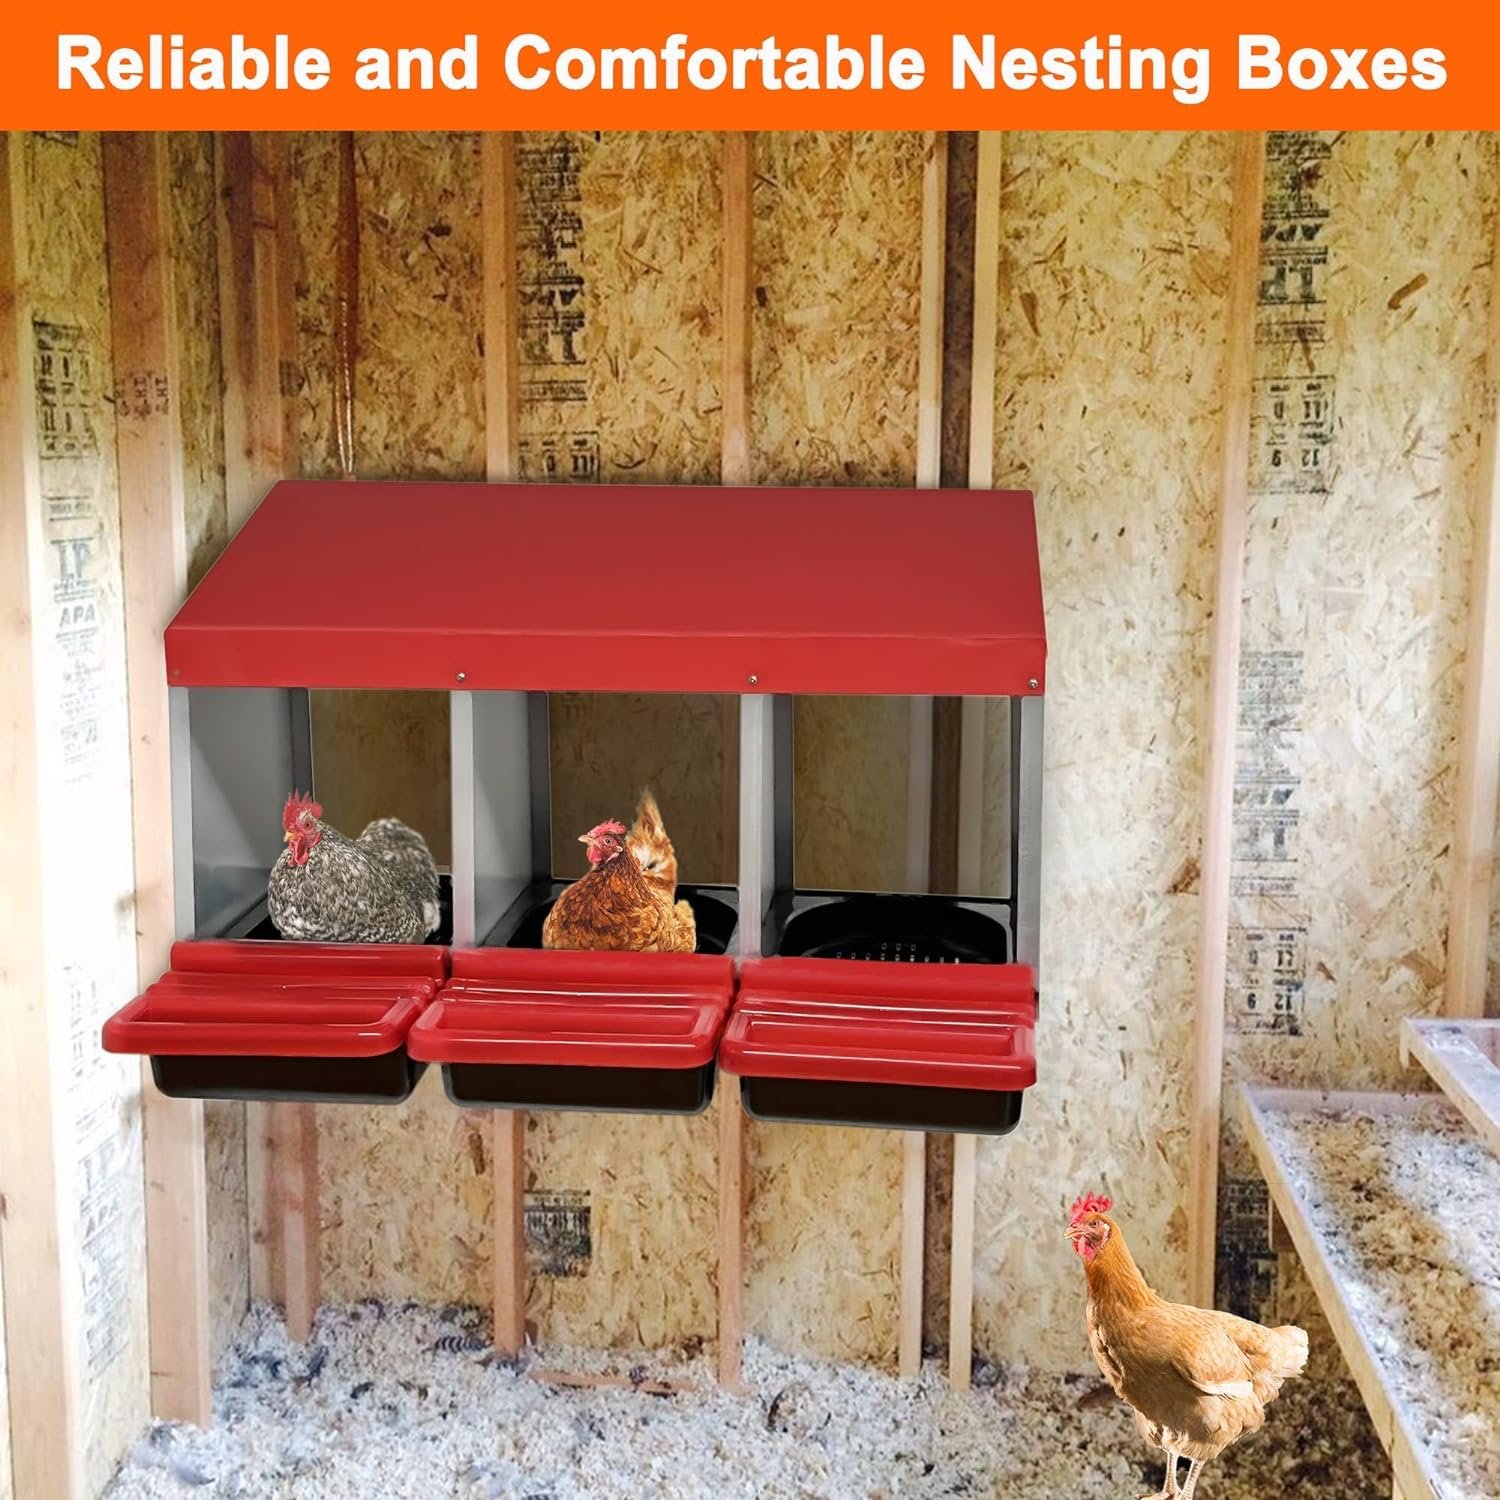 ZenxyHoC Chicken Nesting Boxes, 3 Hole Metal Chicken Egg Laying Box with Swing Perch and Rollout Egg Collection for Chicken Coop